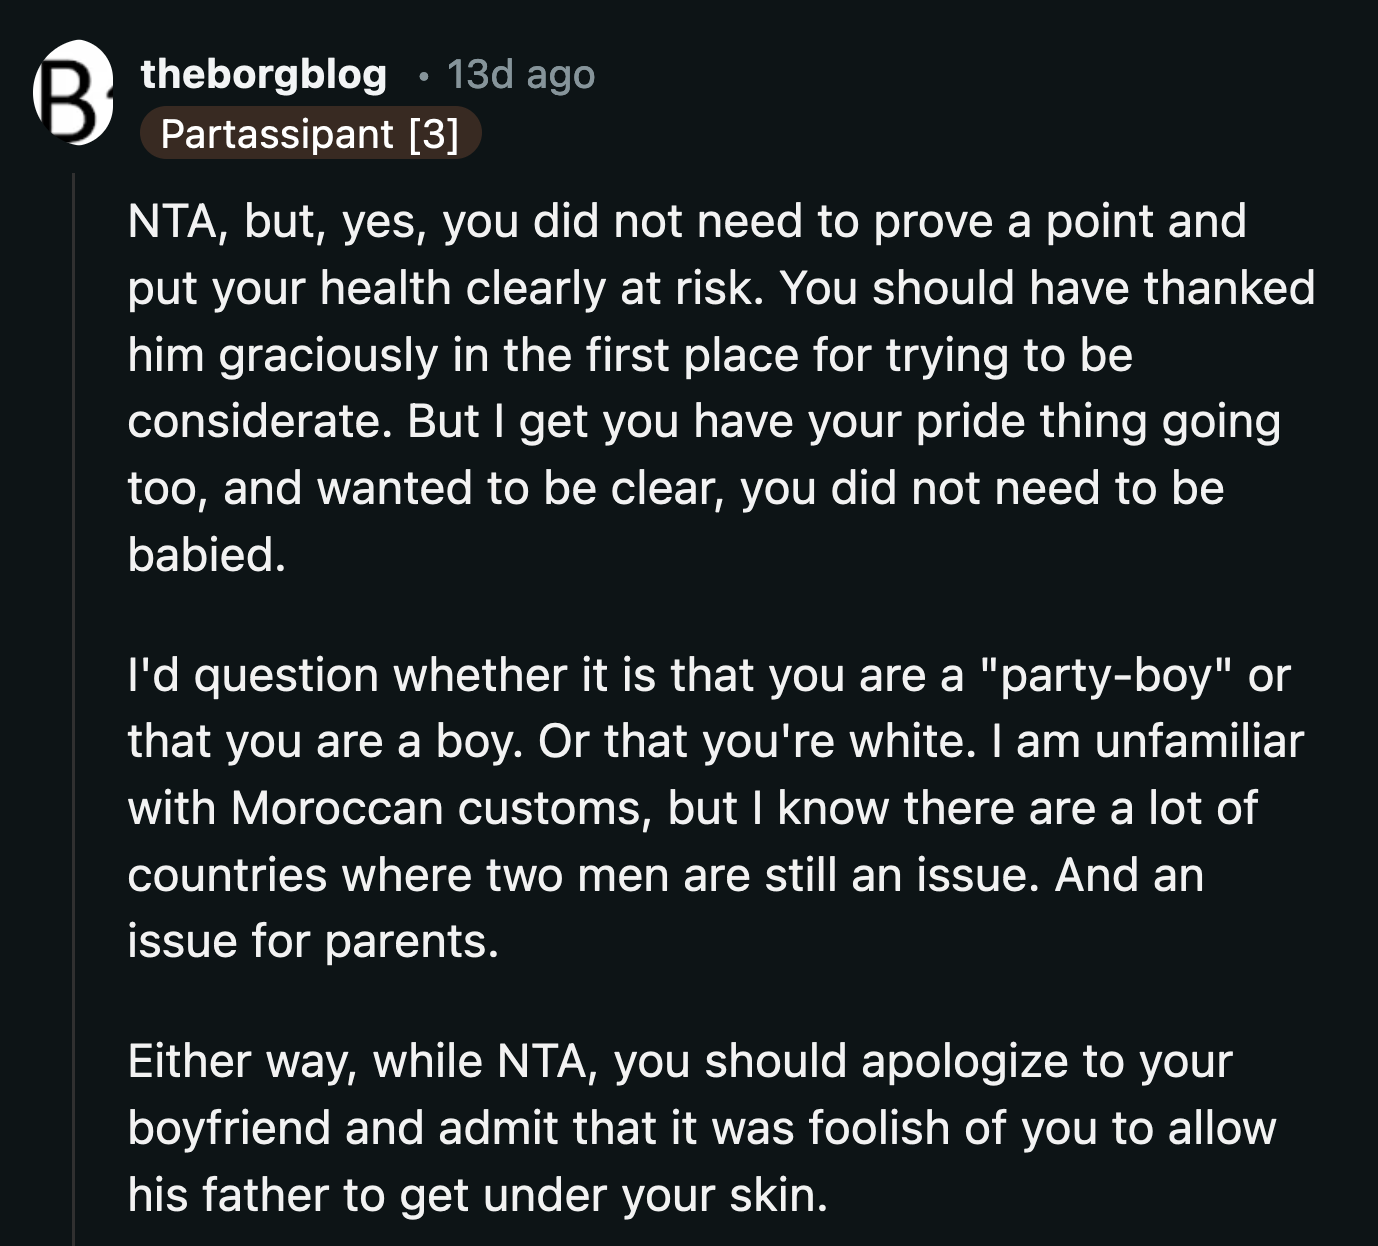 No matter whose fault the odd competition was, OP should still apologize to his boyfriend.